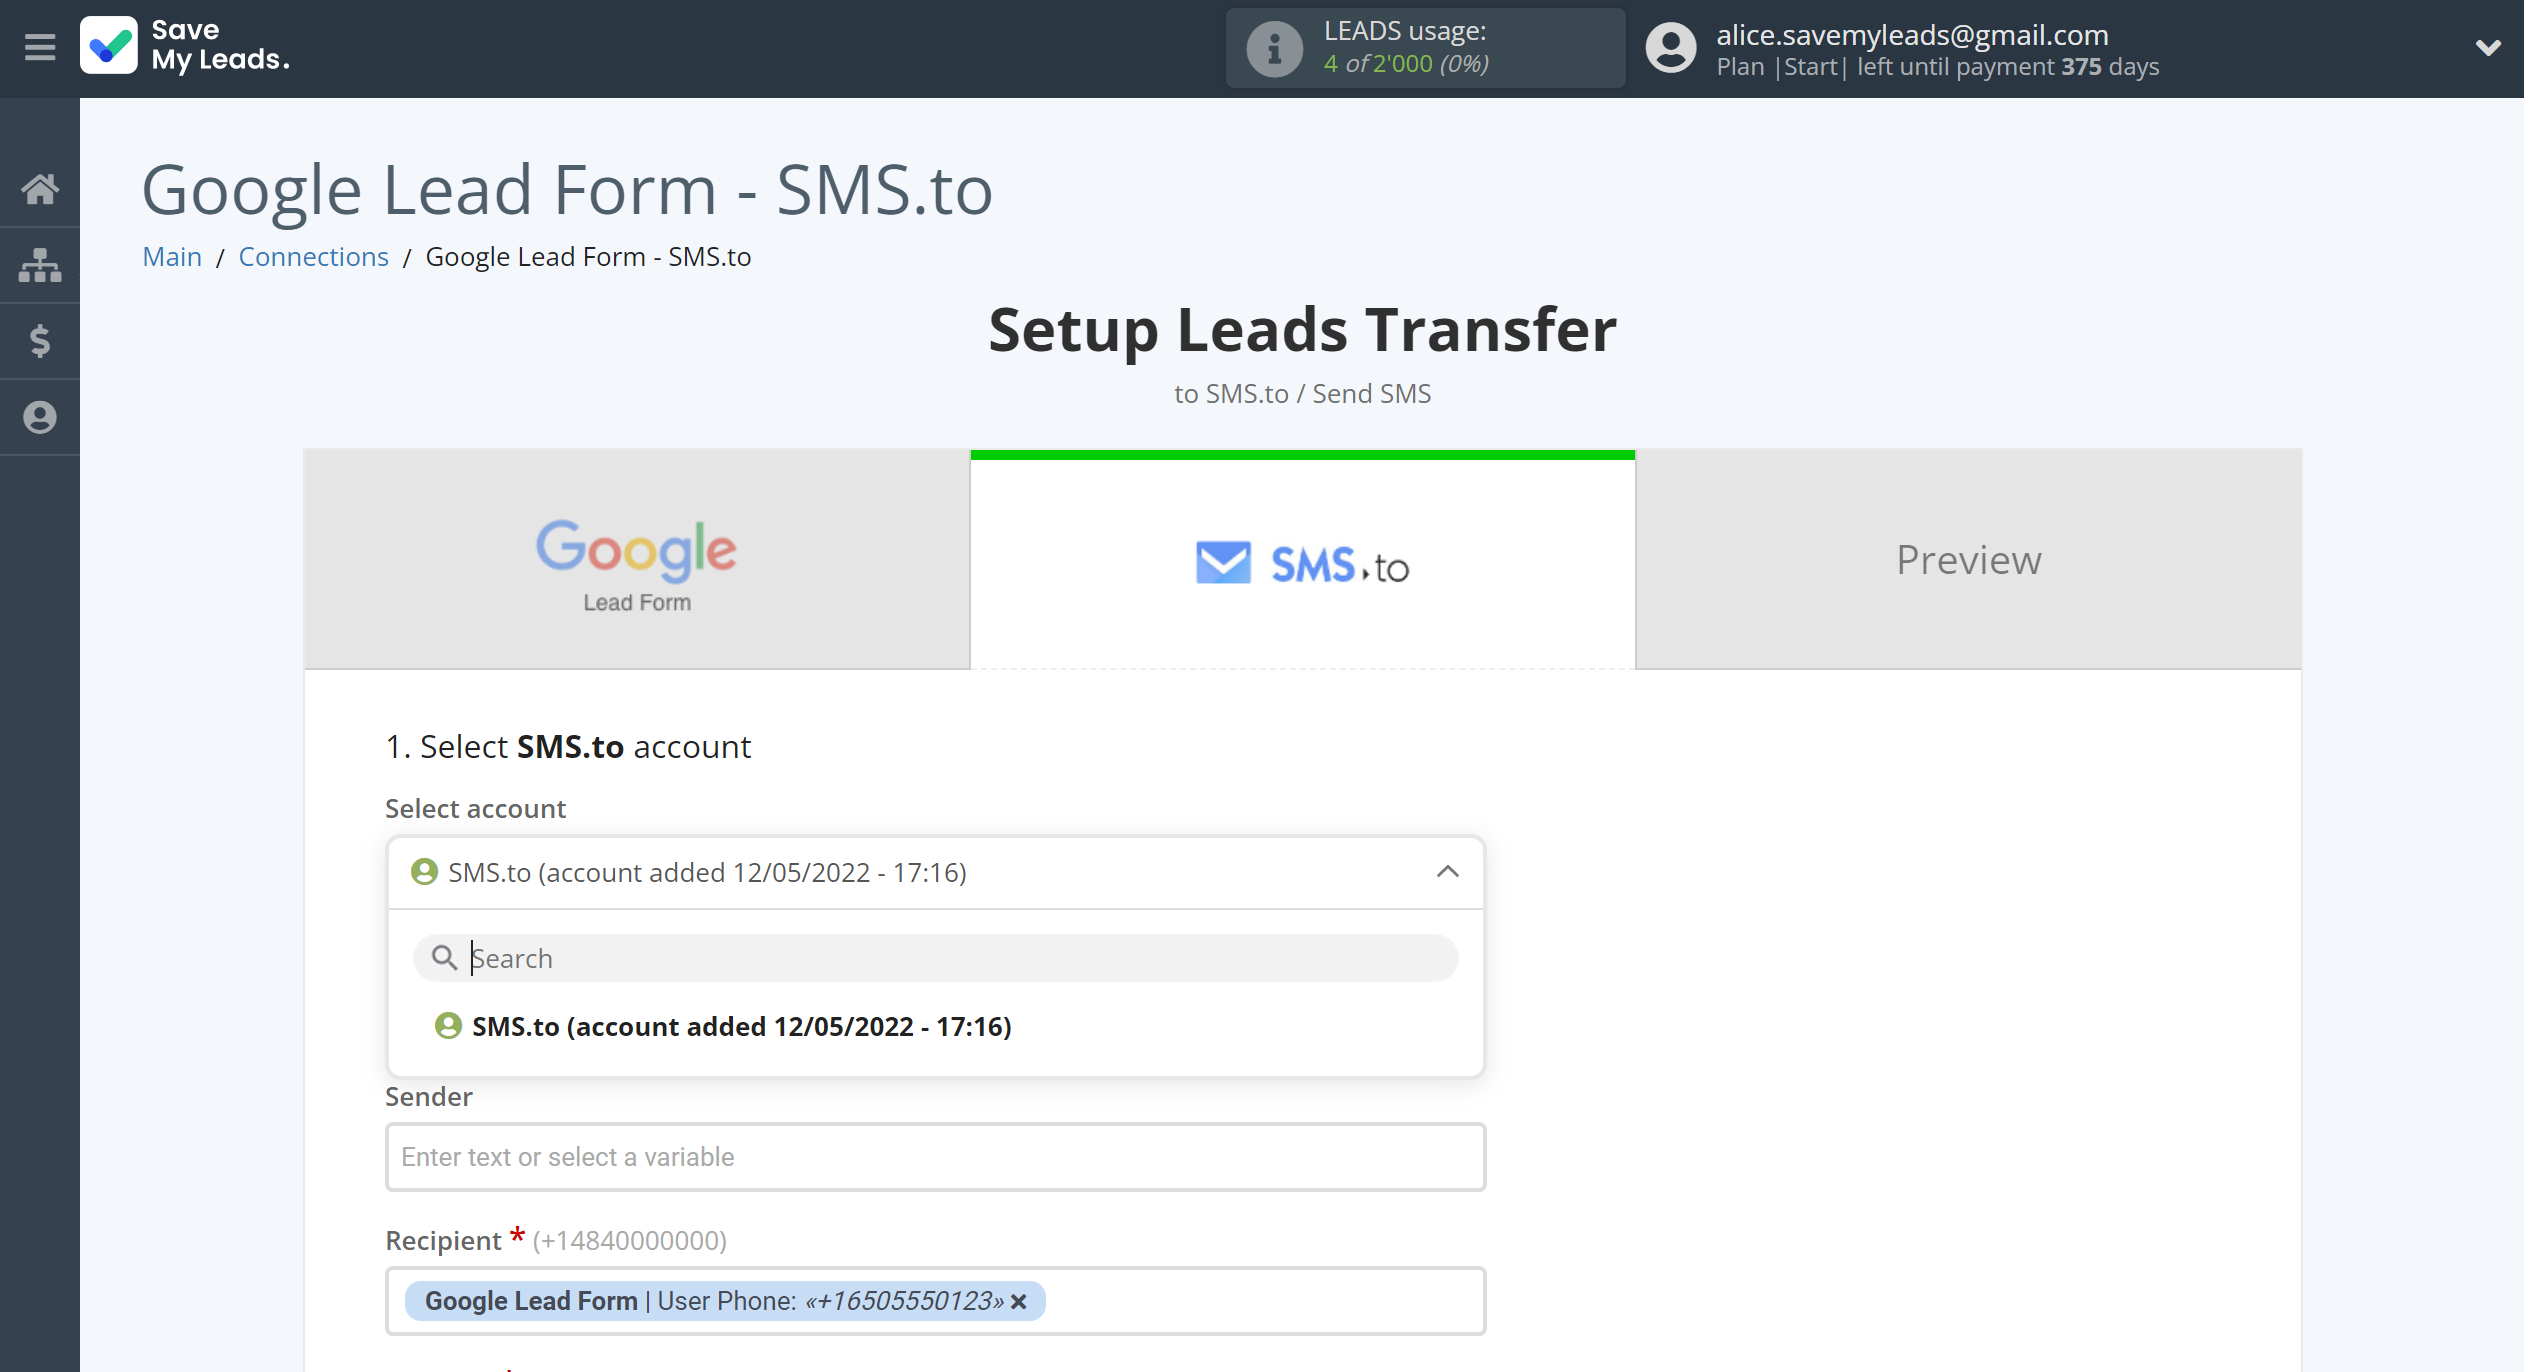 How to Connect Google Lead Form with SMS.to | Data Destination account selection